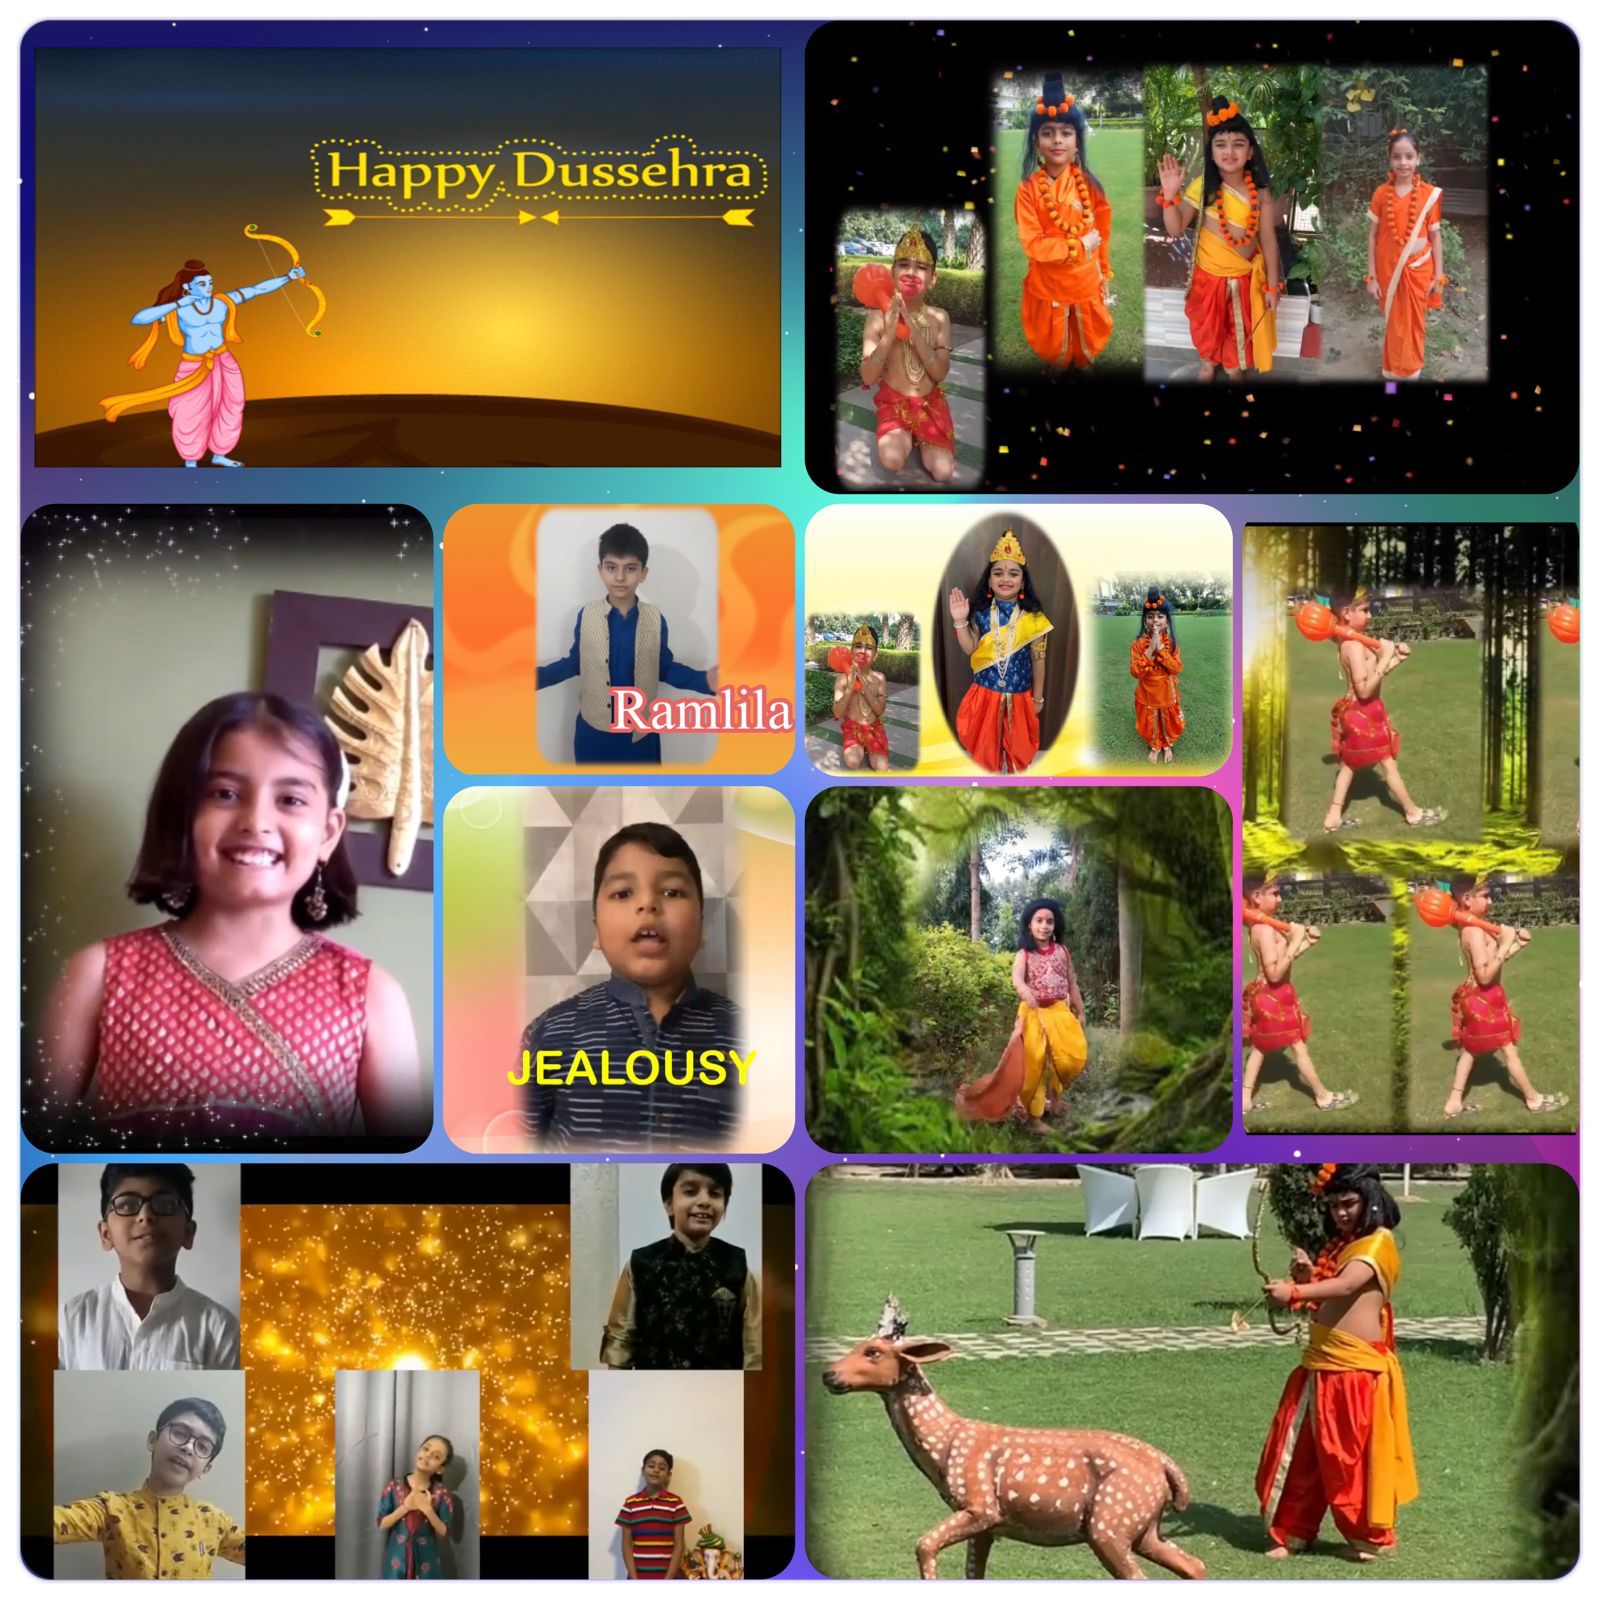 Special Assembly by III H on Dusshera